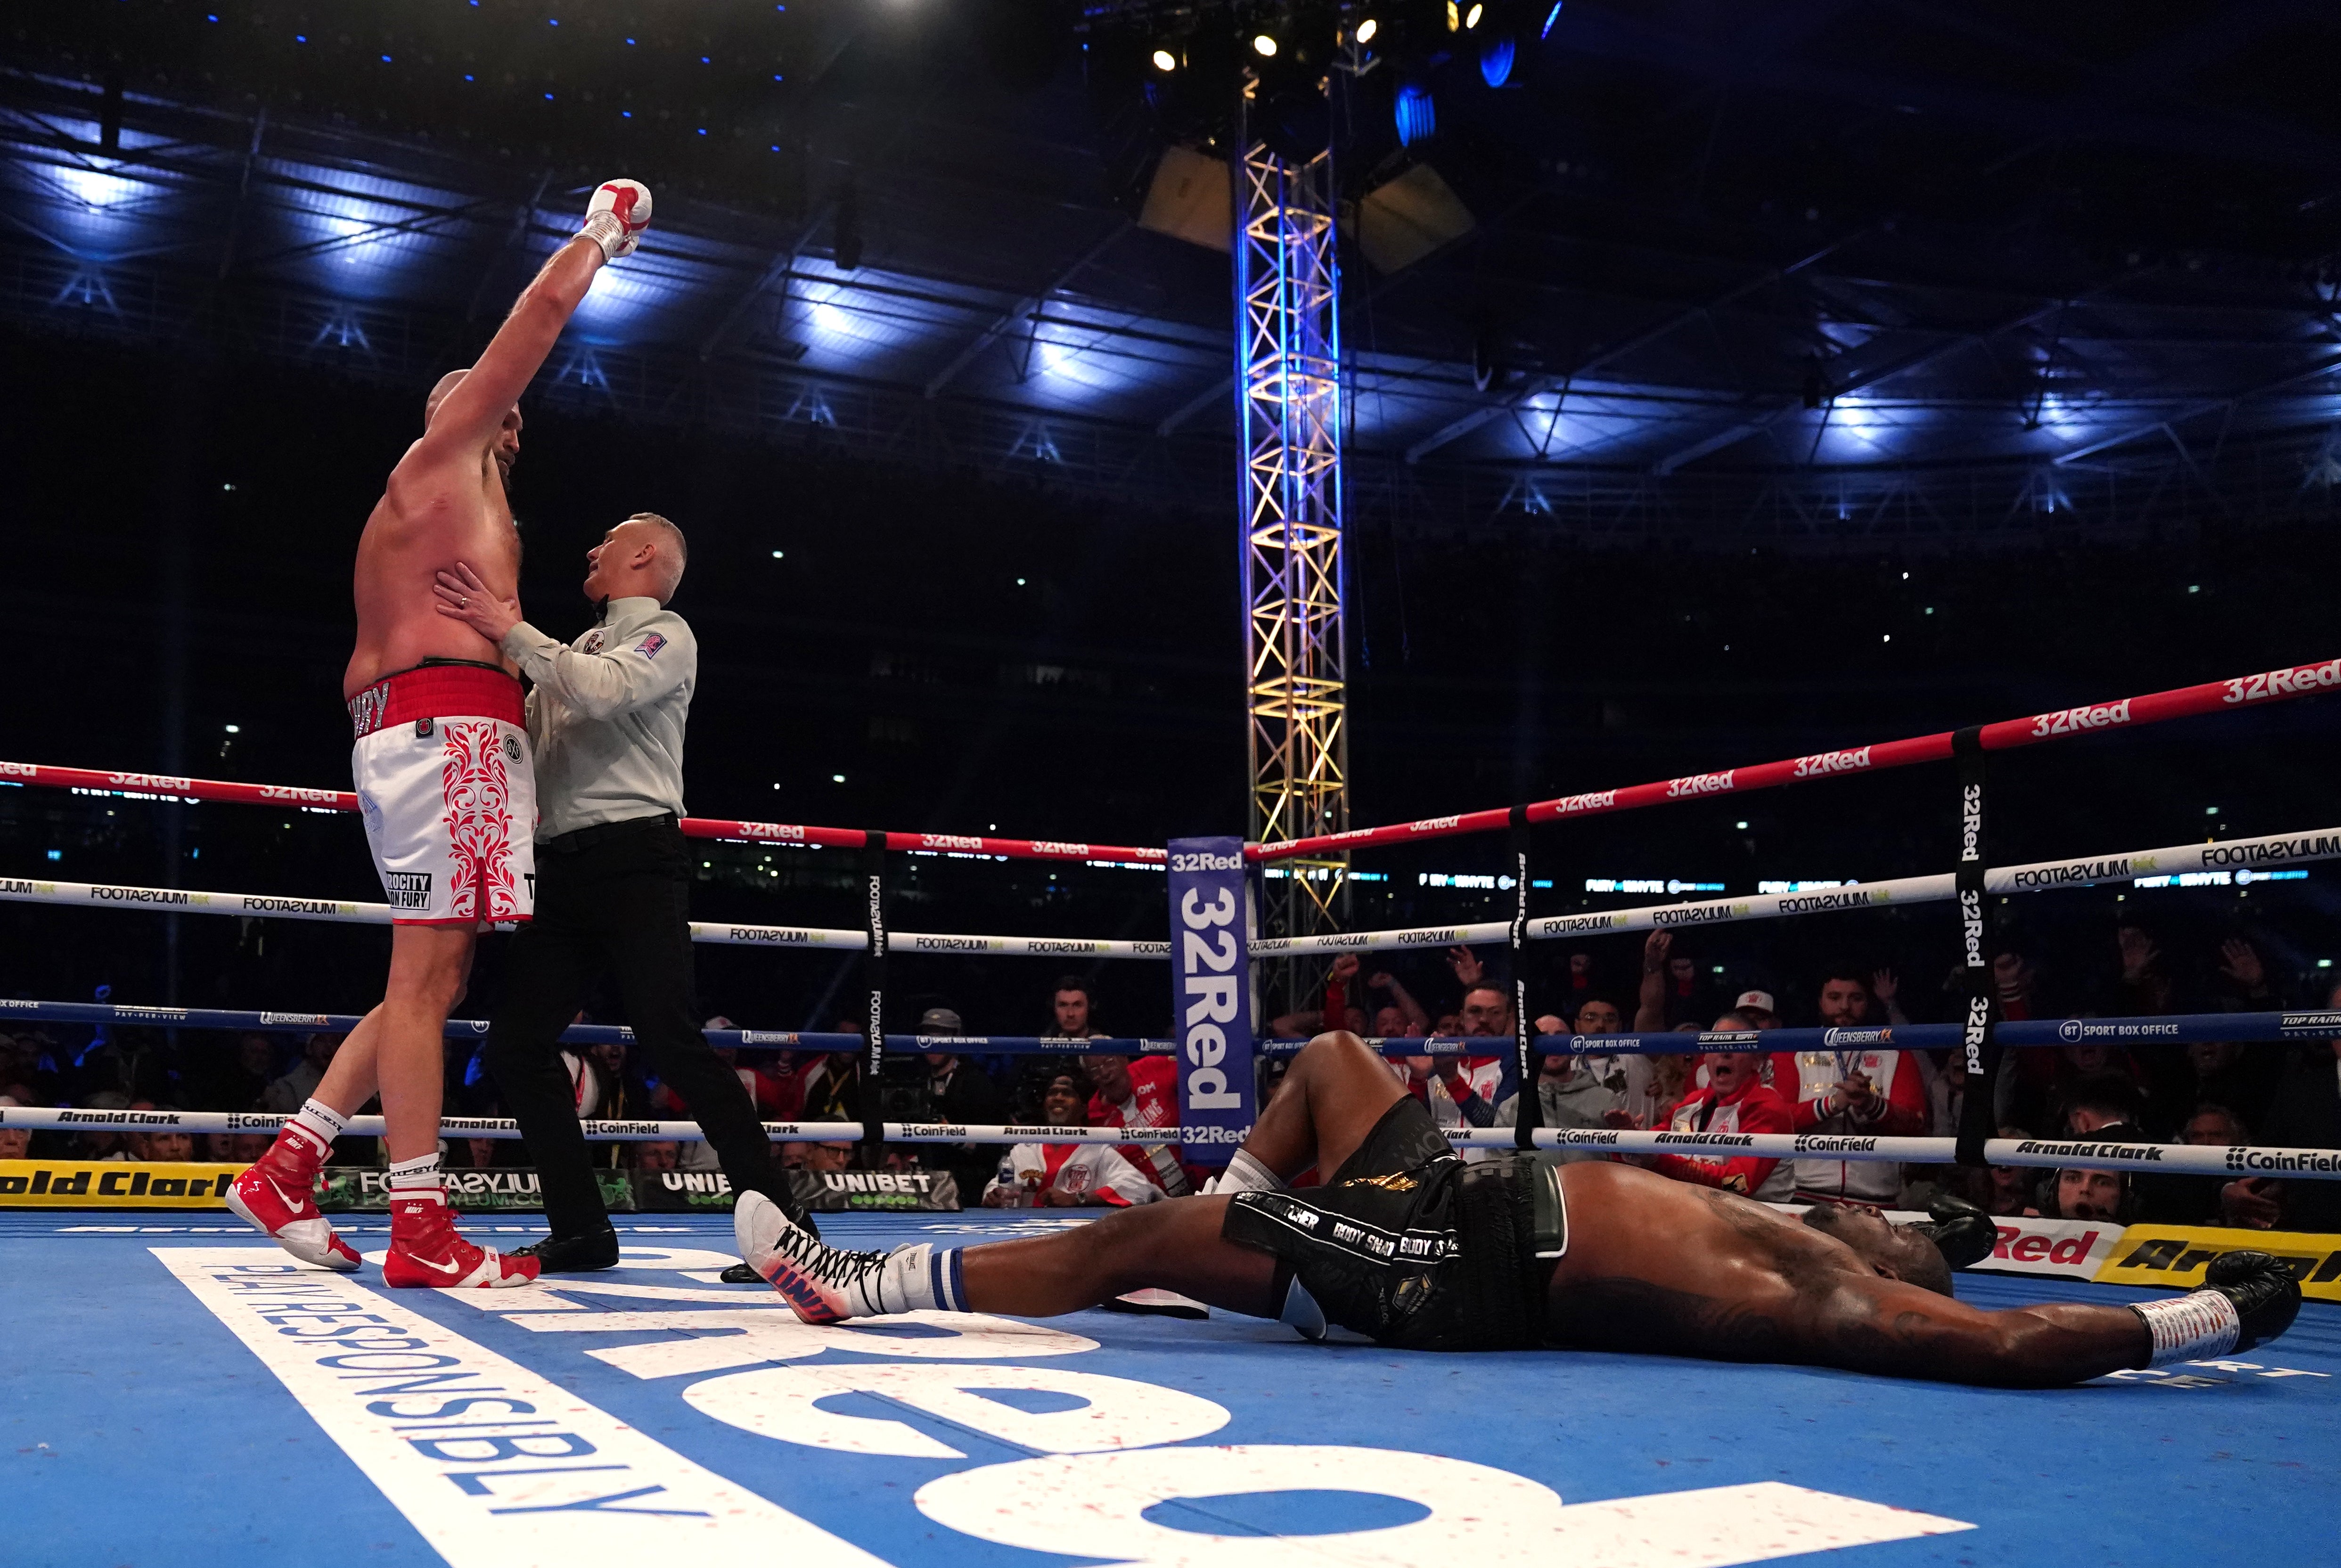 Fury knocked out Dillian Whyte with an uppercut in round 6